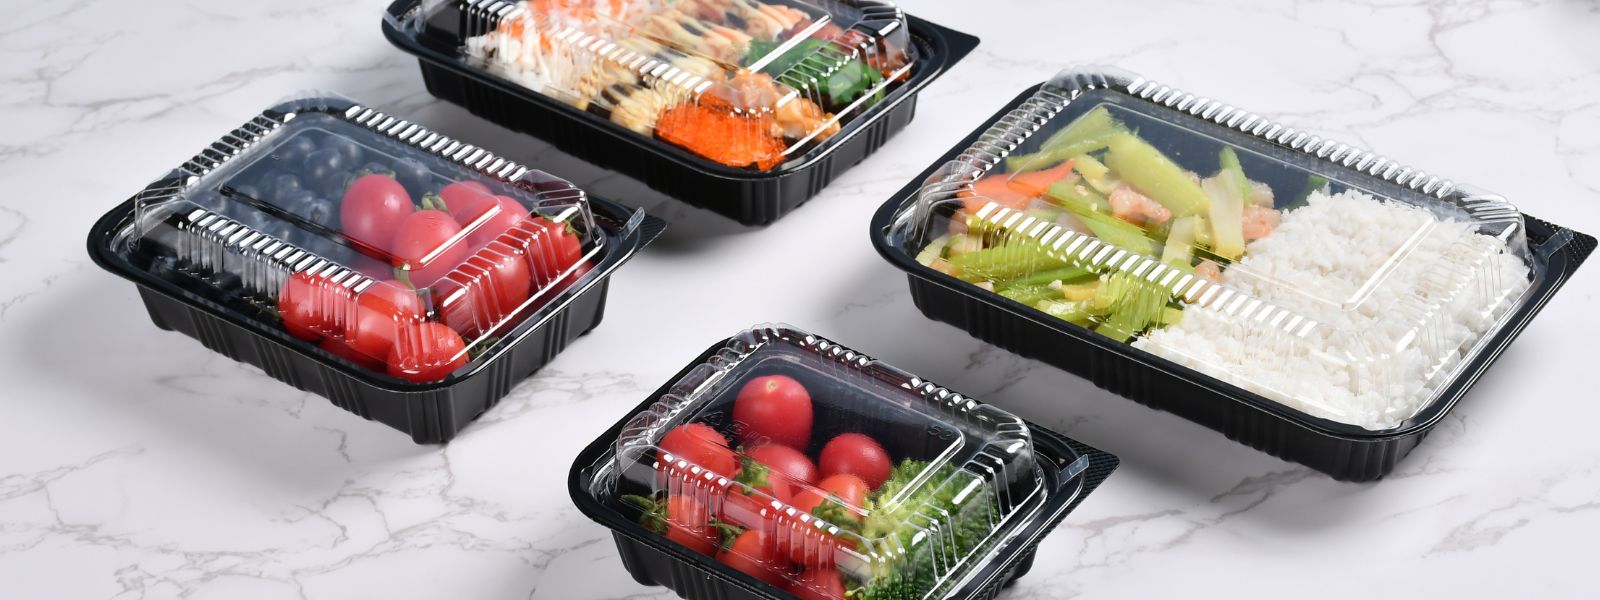 4 bento boxes of different sizes with sushi, fruit food placed together